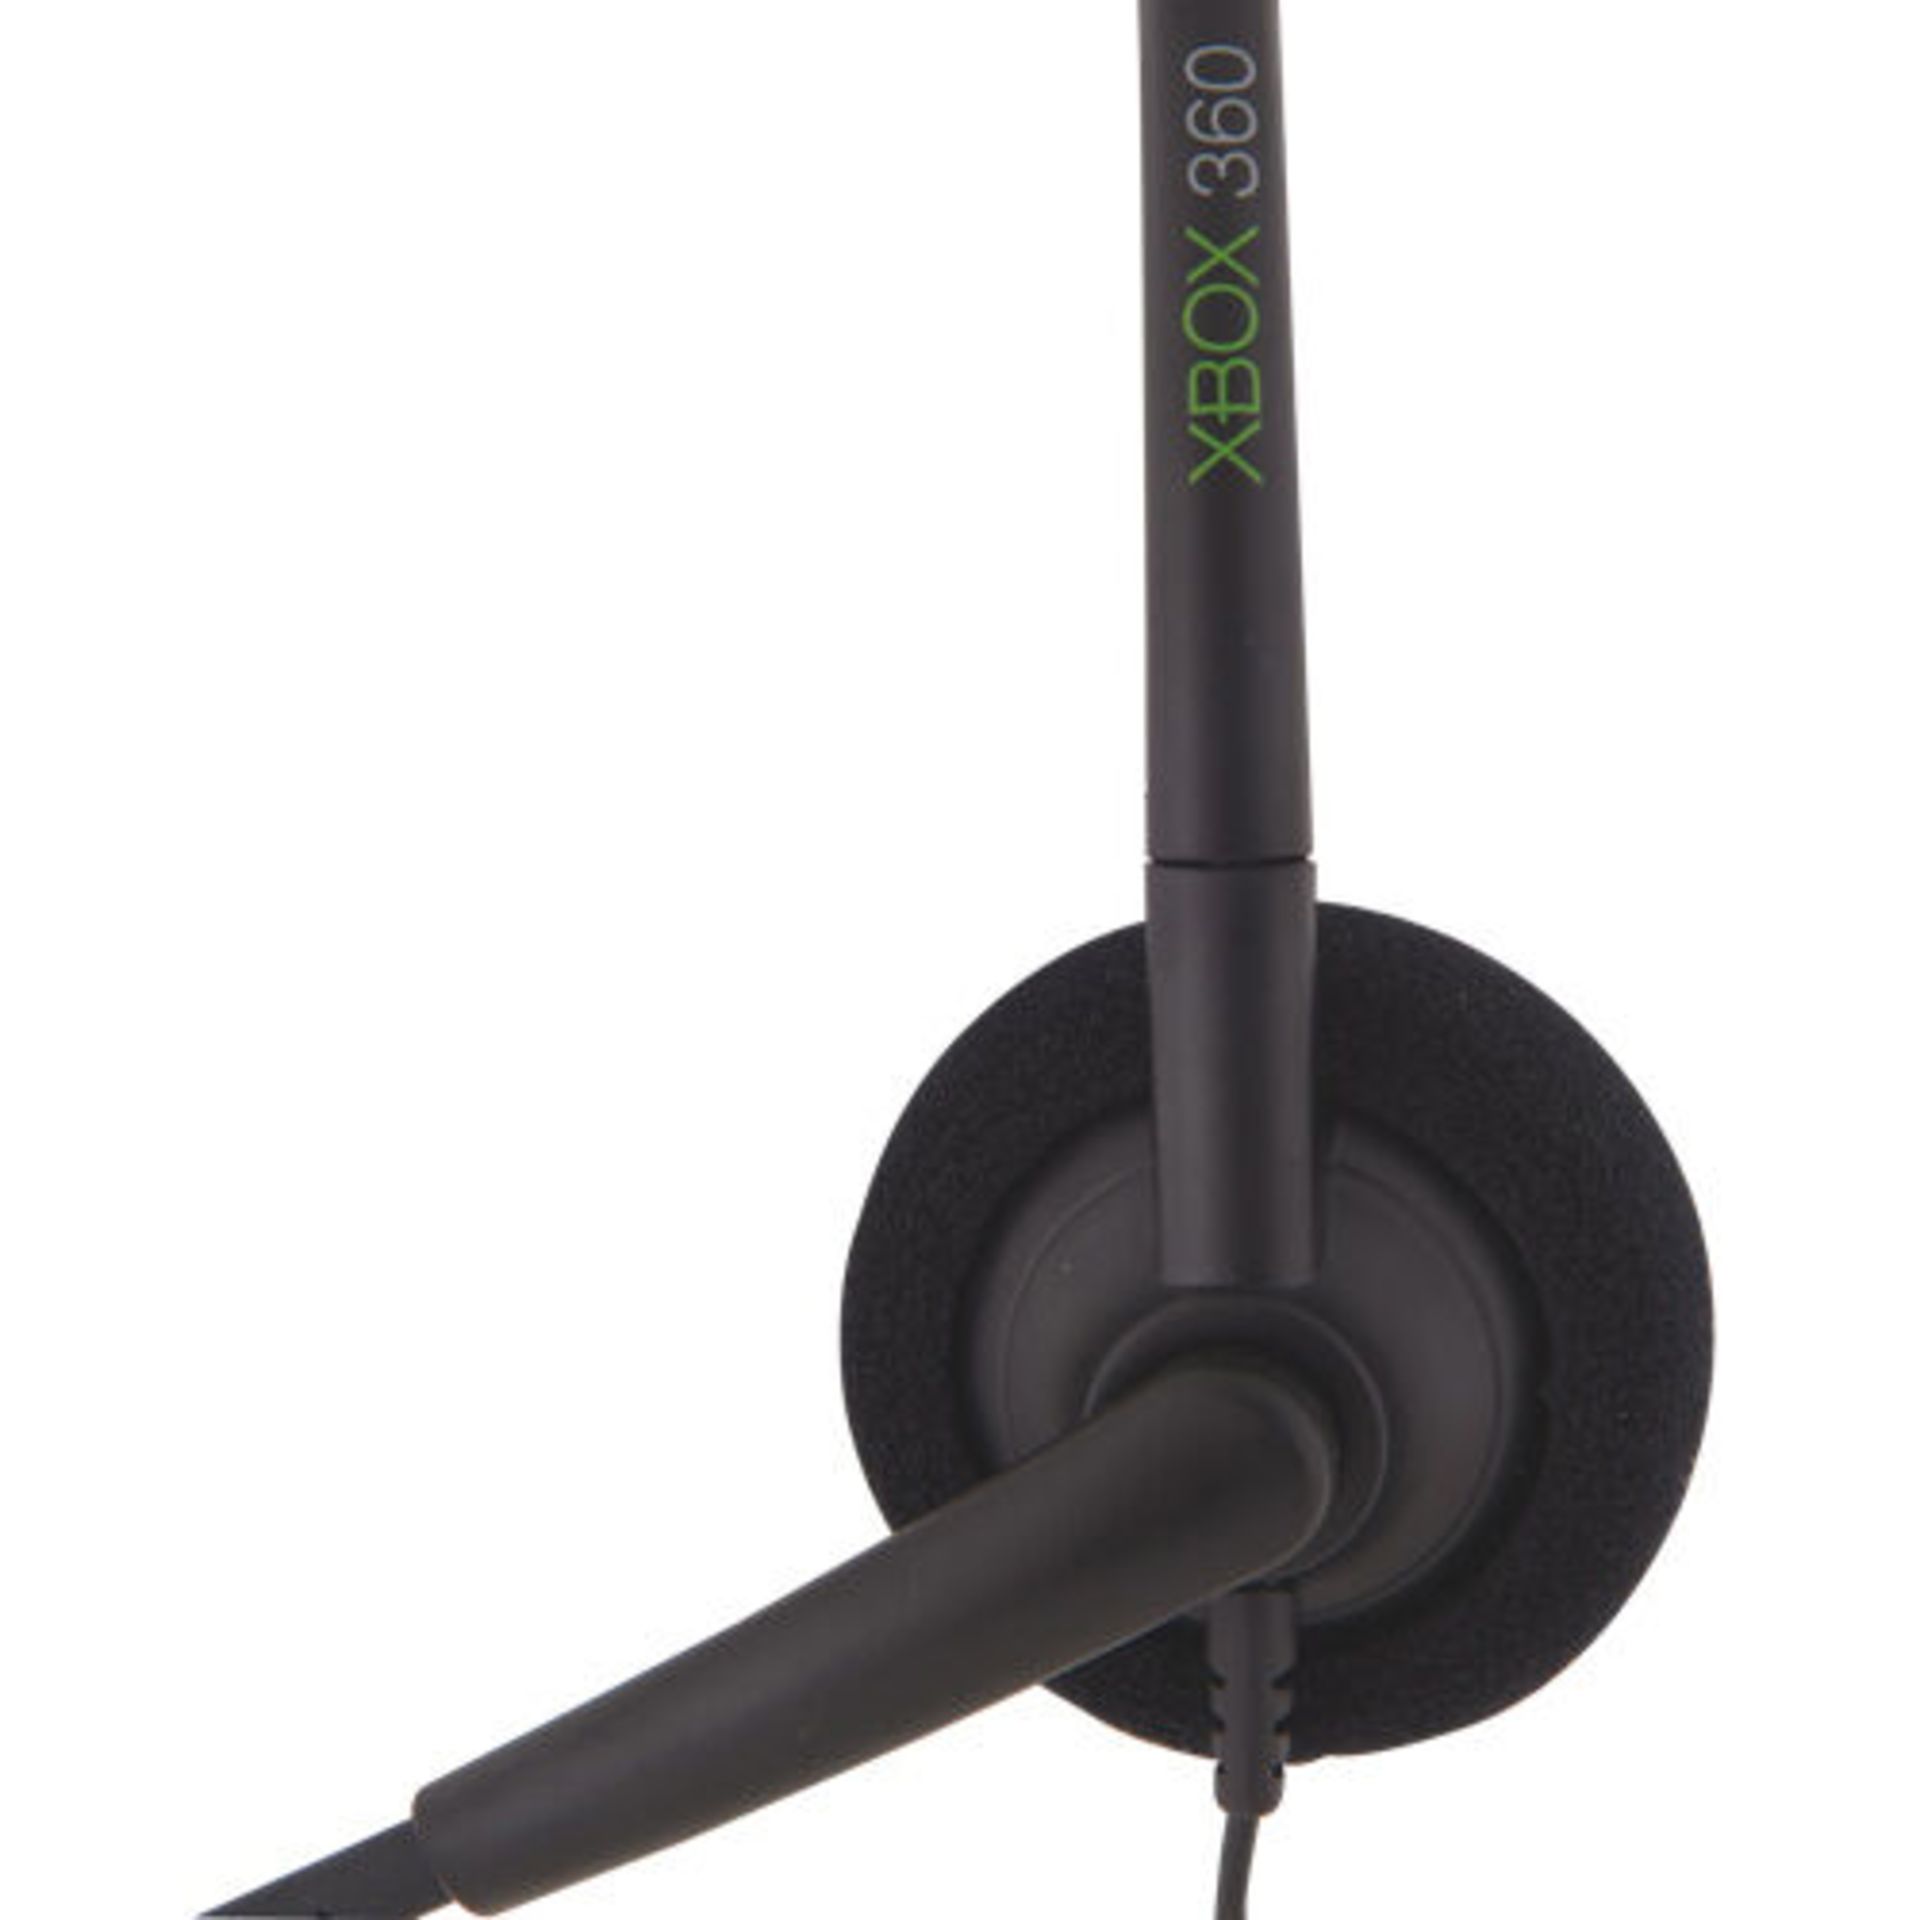 JOBLOT 500 X NEW OFFICIAL XBOX 360 LIVE ONLINE CHAT HEADSET WITH MIC GAMING HEADPHONES 2.5MM AUX - Image 5 of 6